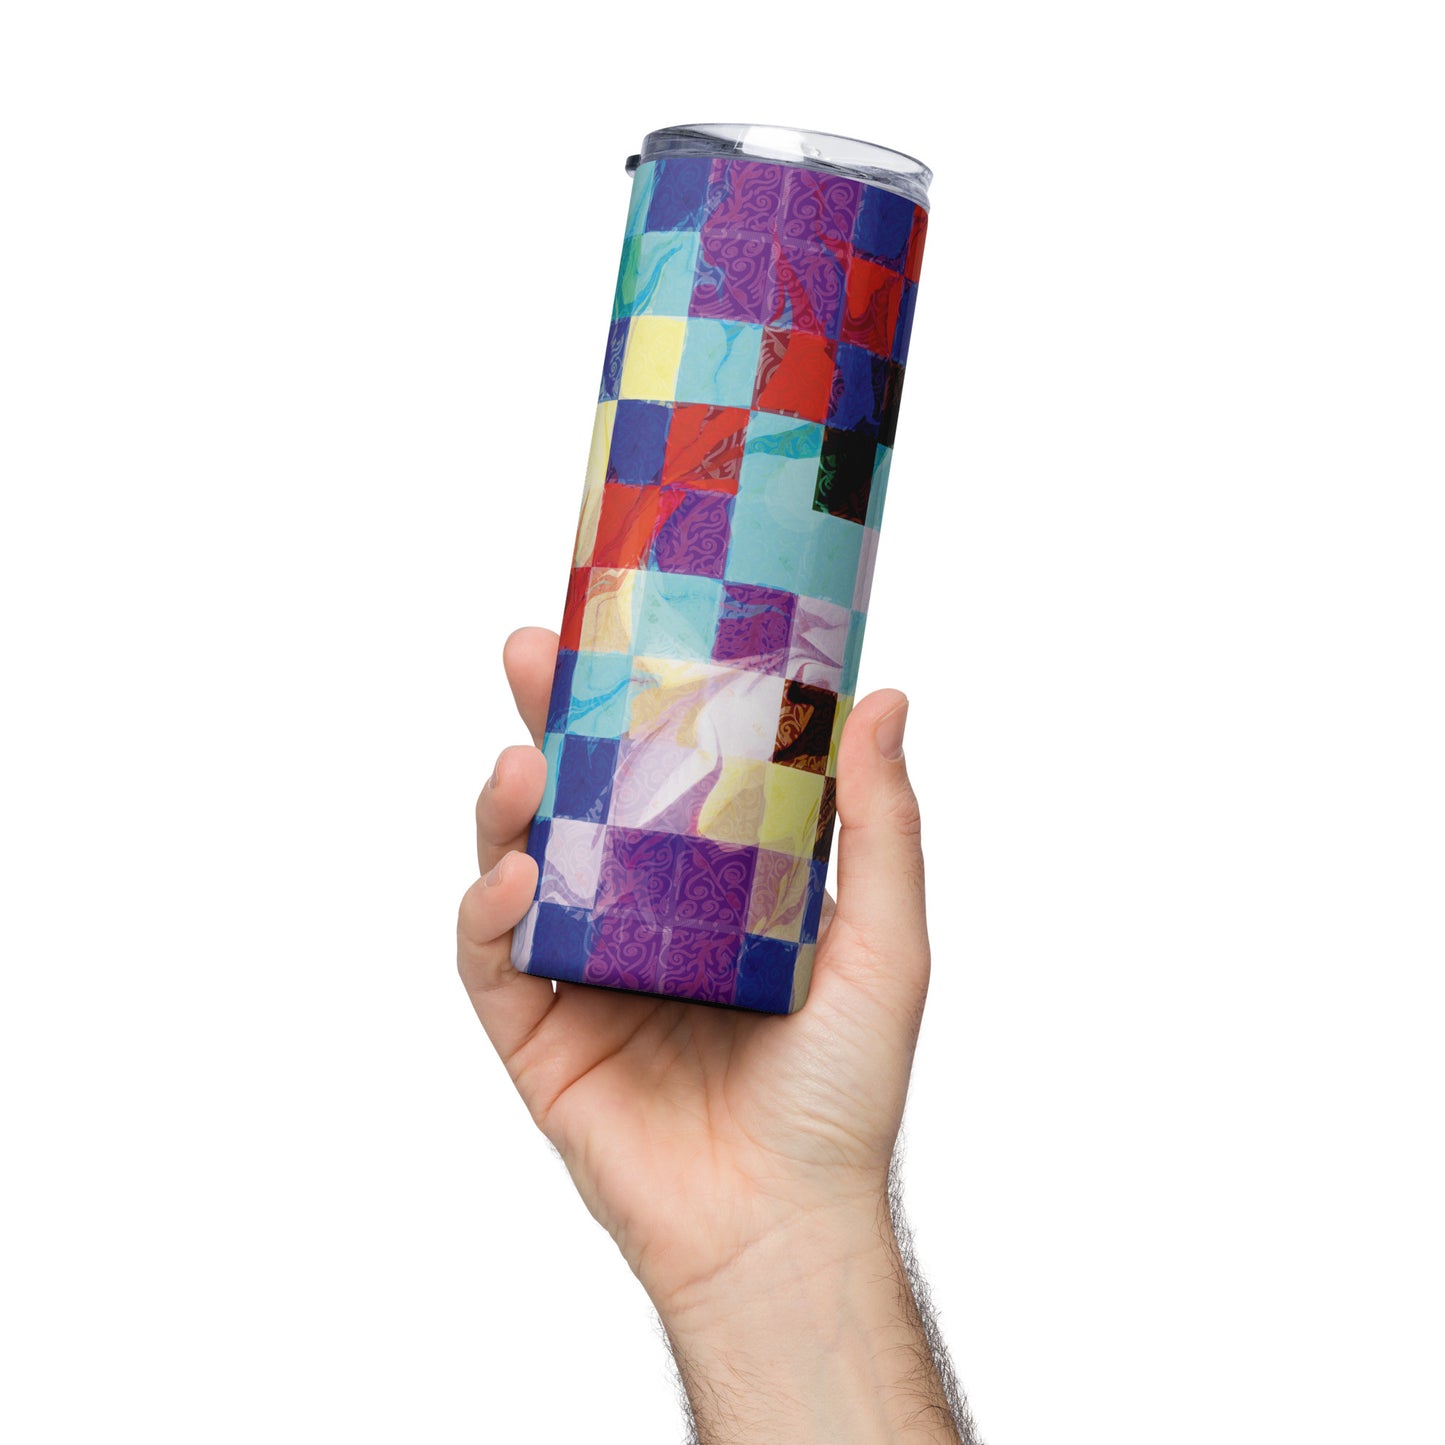 Quilt Style Stainless steel tumbler by Emmy Spoon